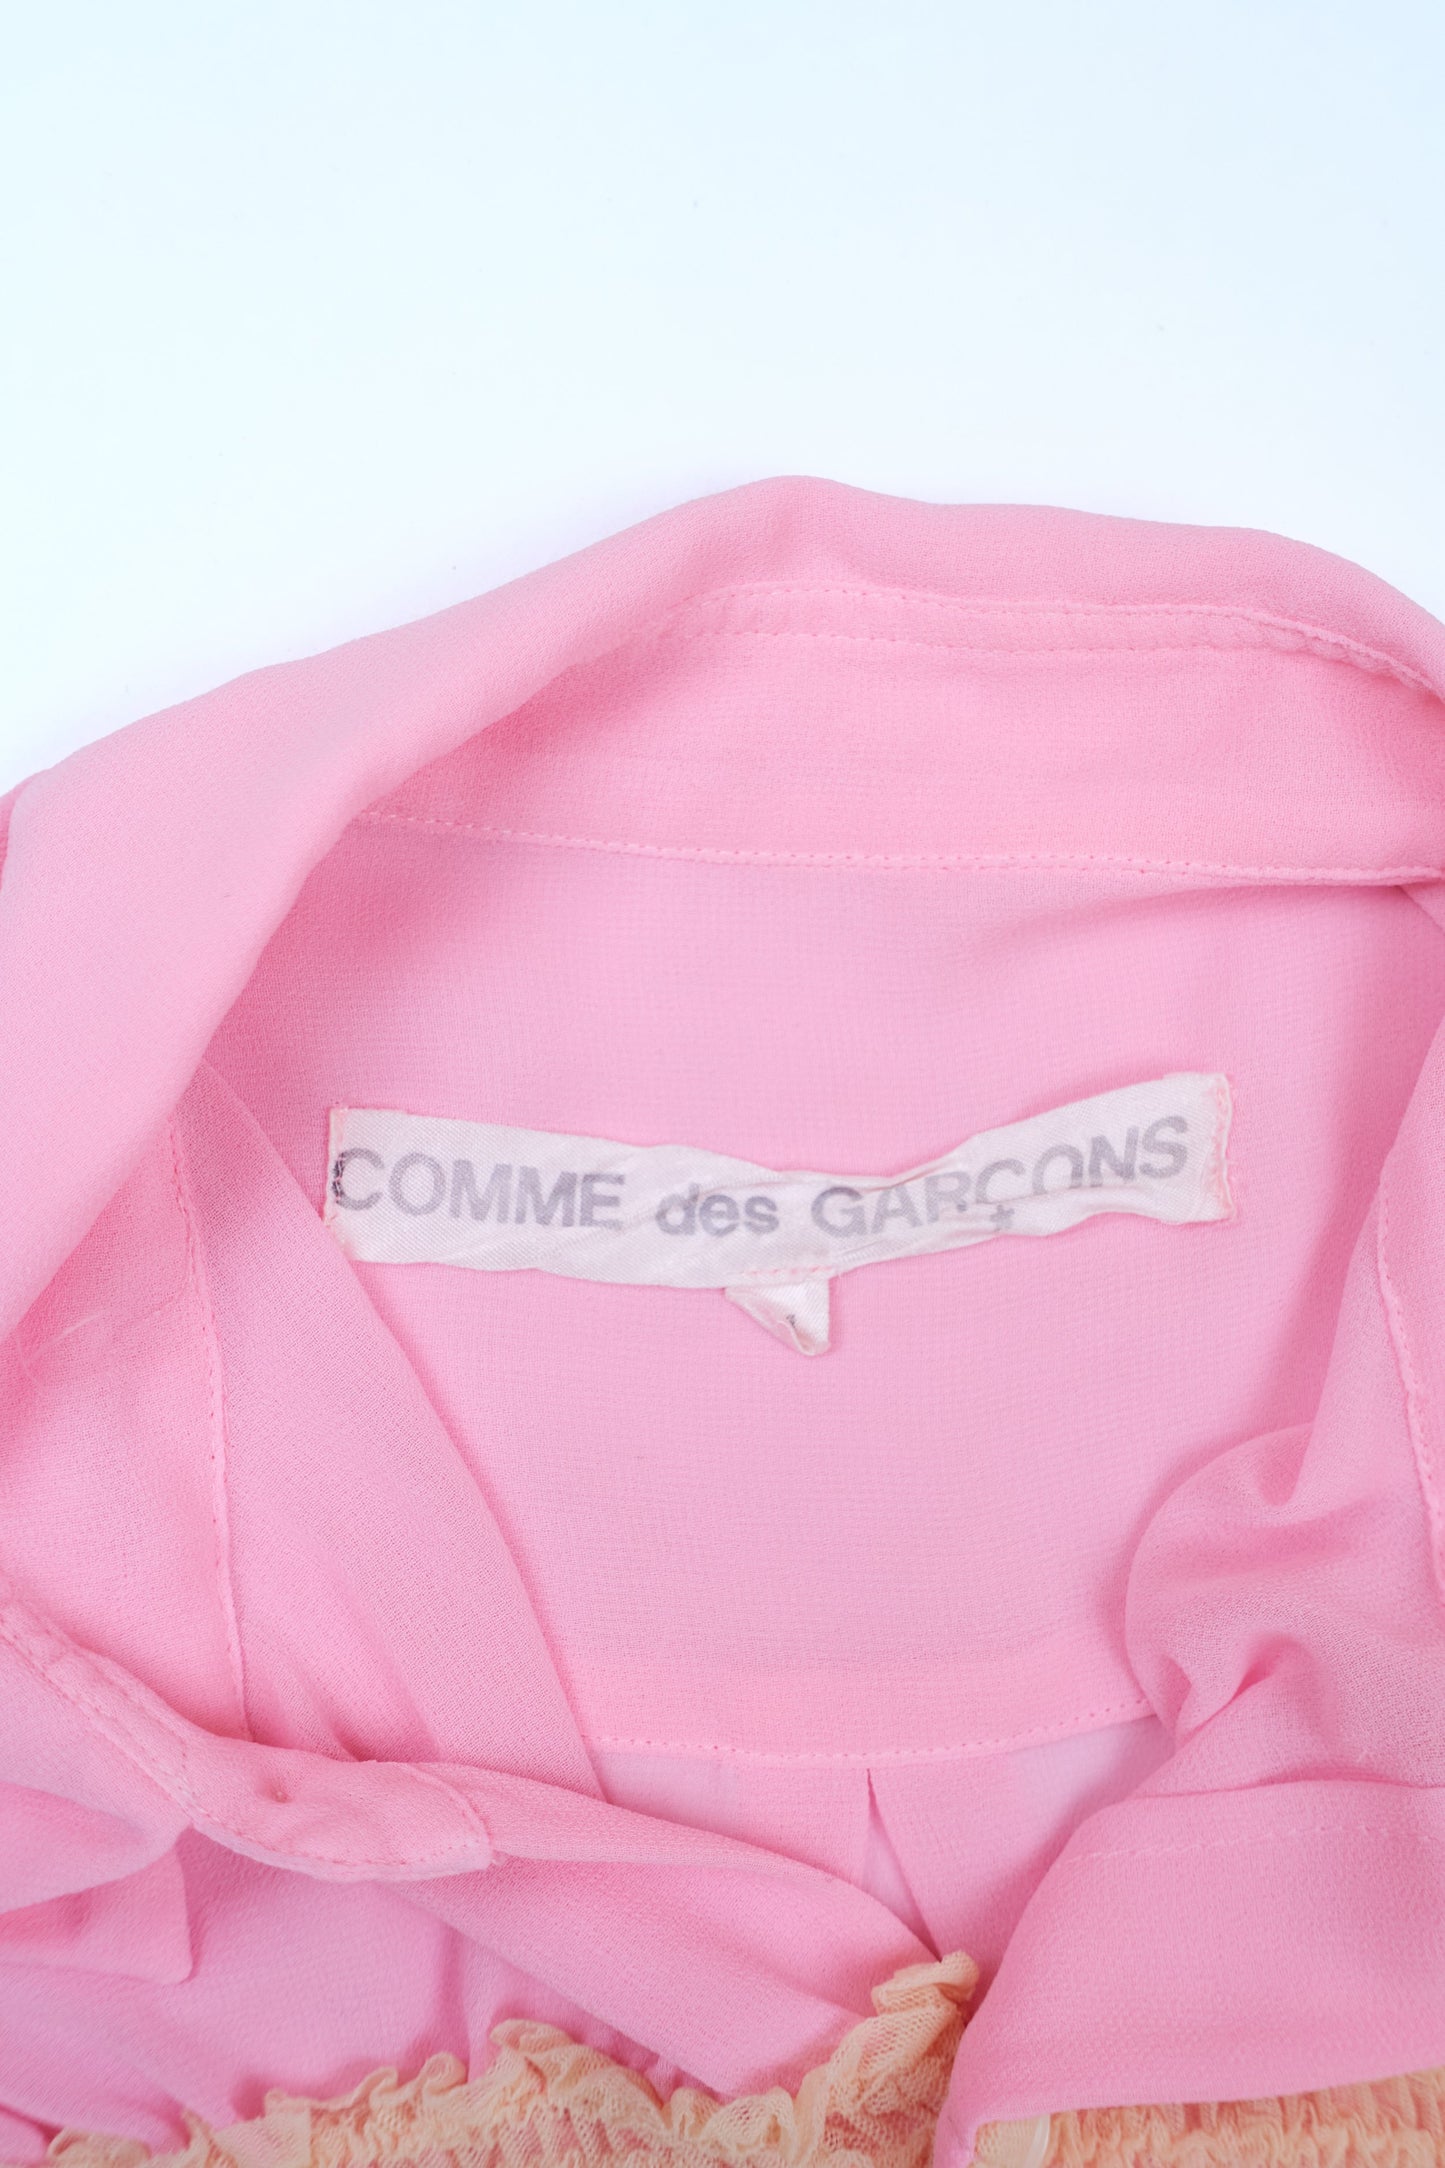 Comme Des Garcons 2004 gathered chest sheer shirt